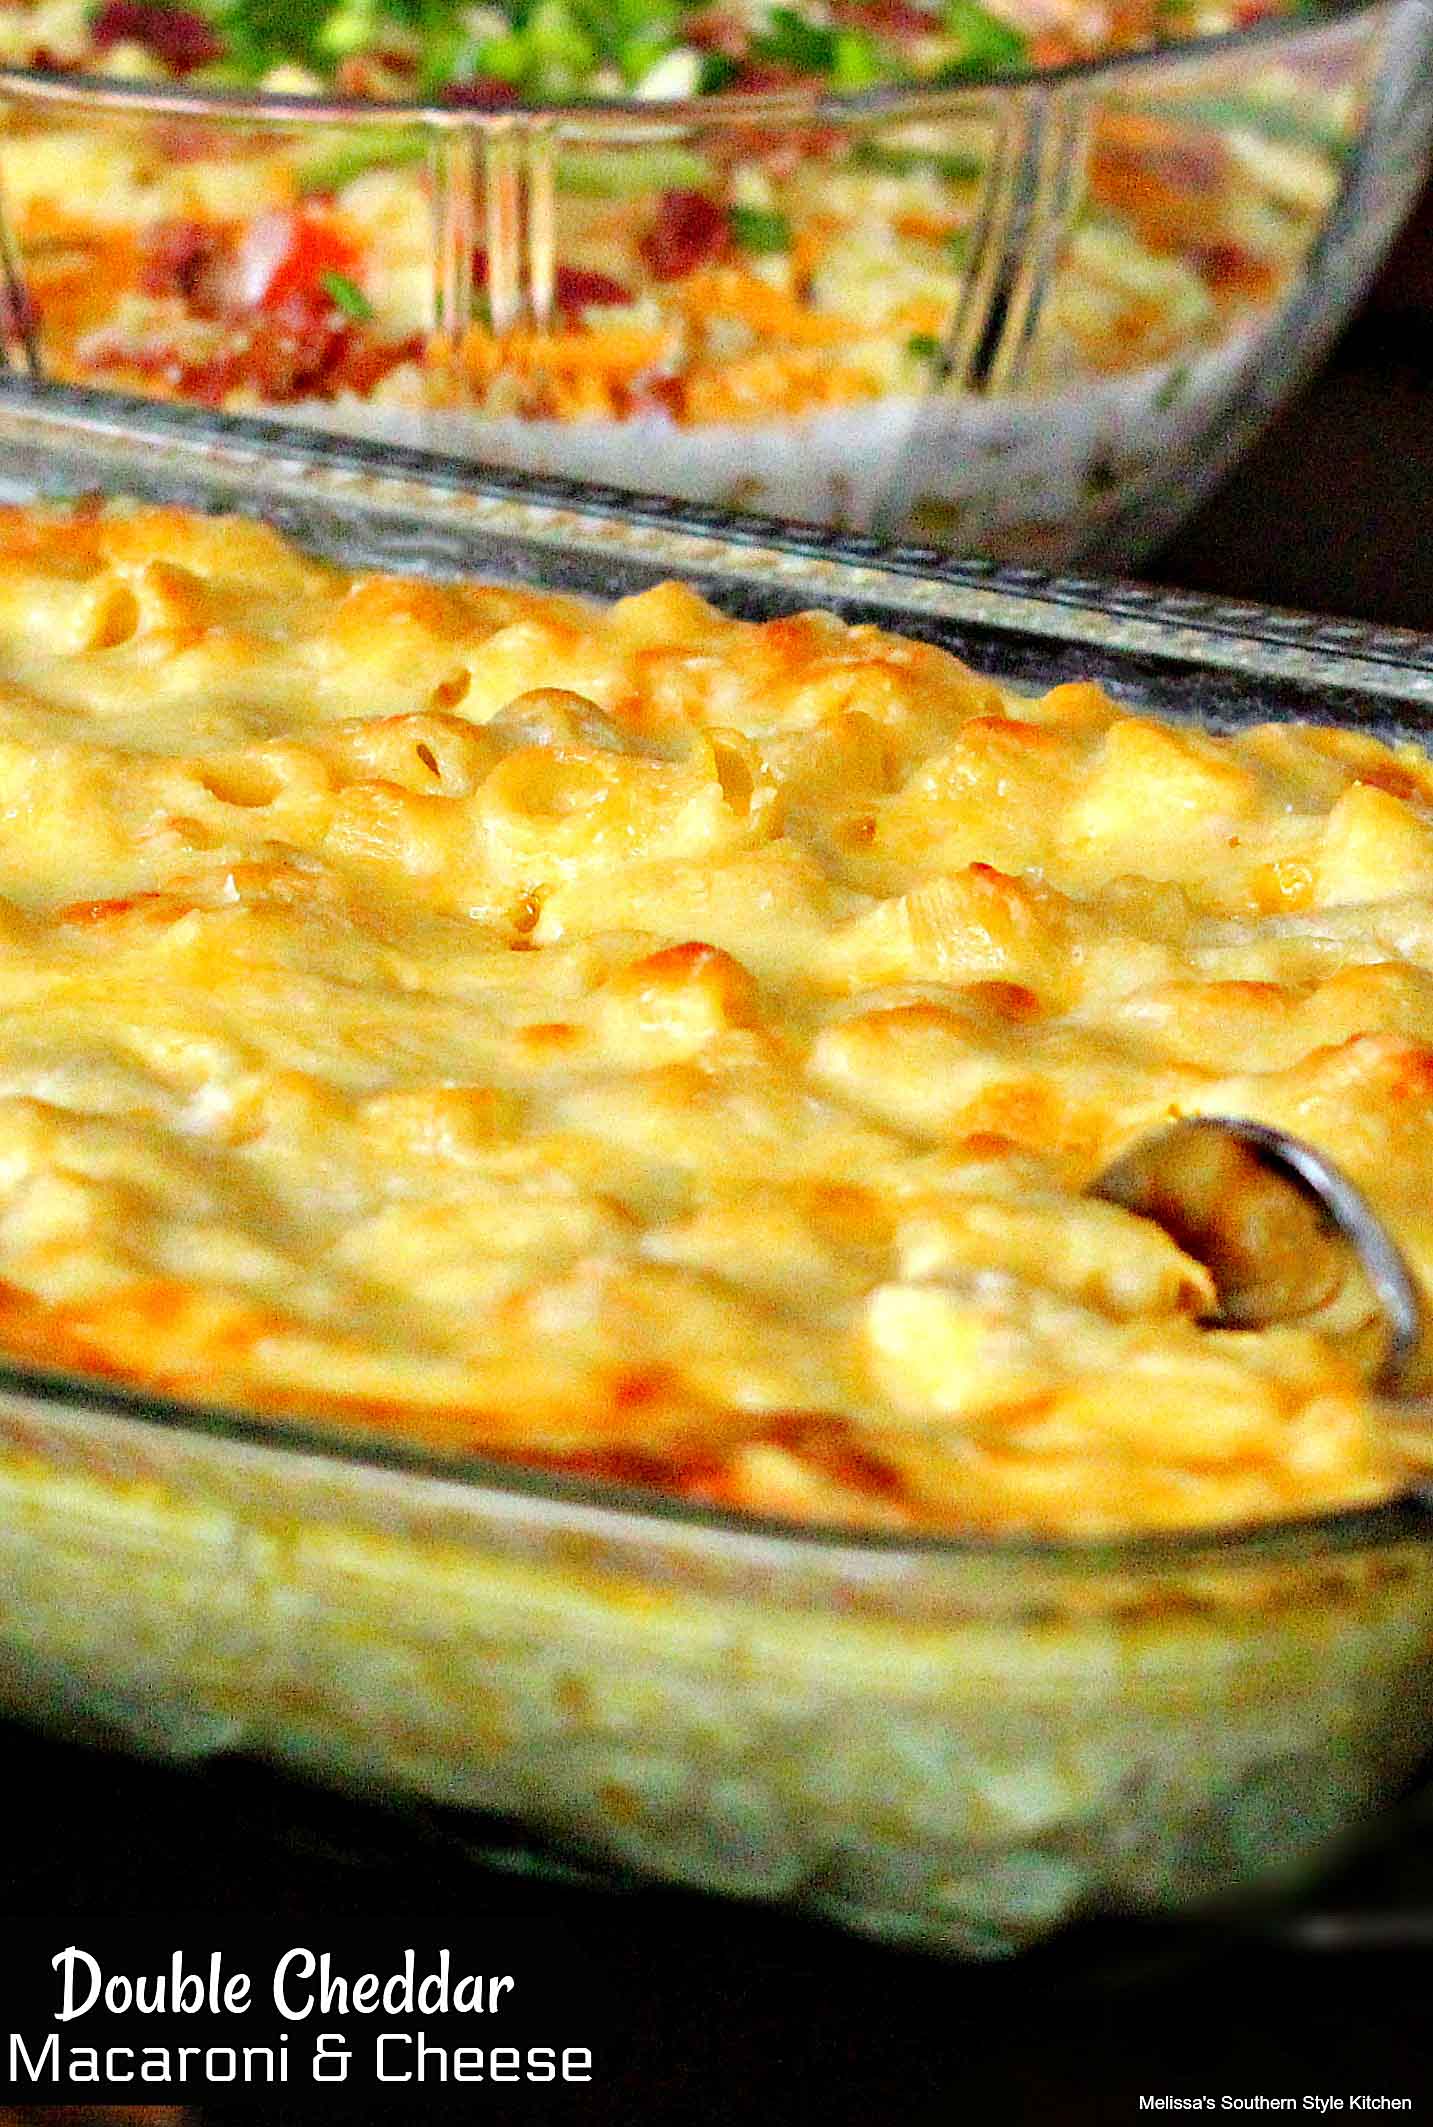 Double Cheddar Macaroni and Cheese